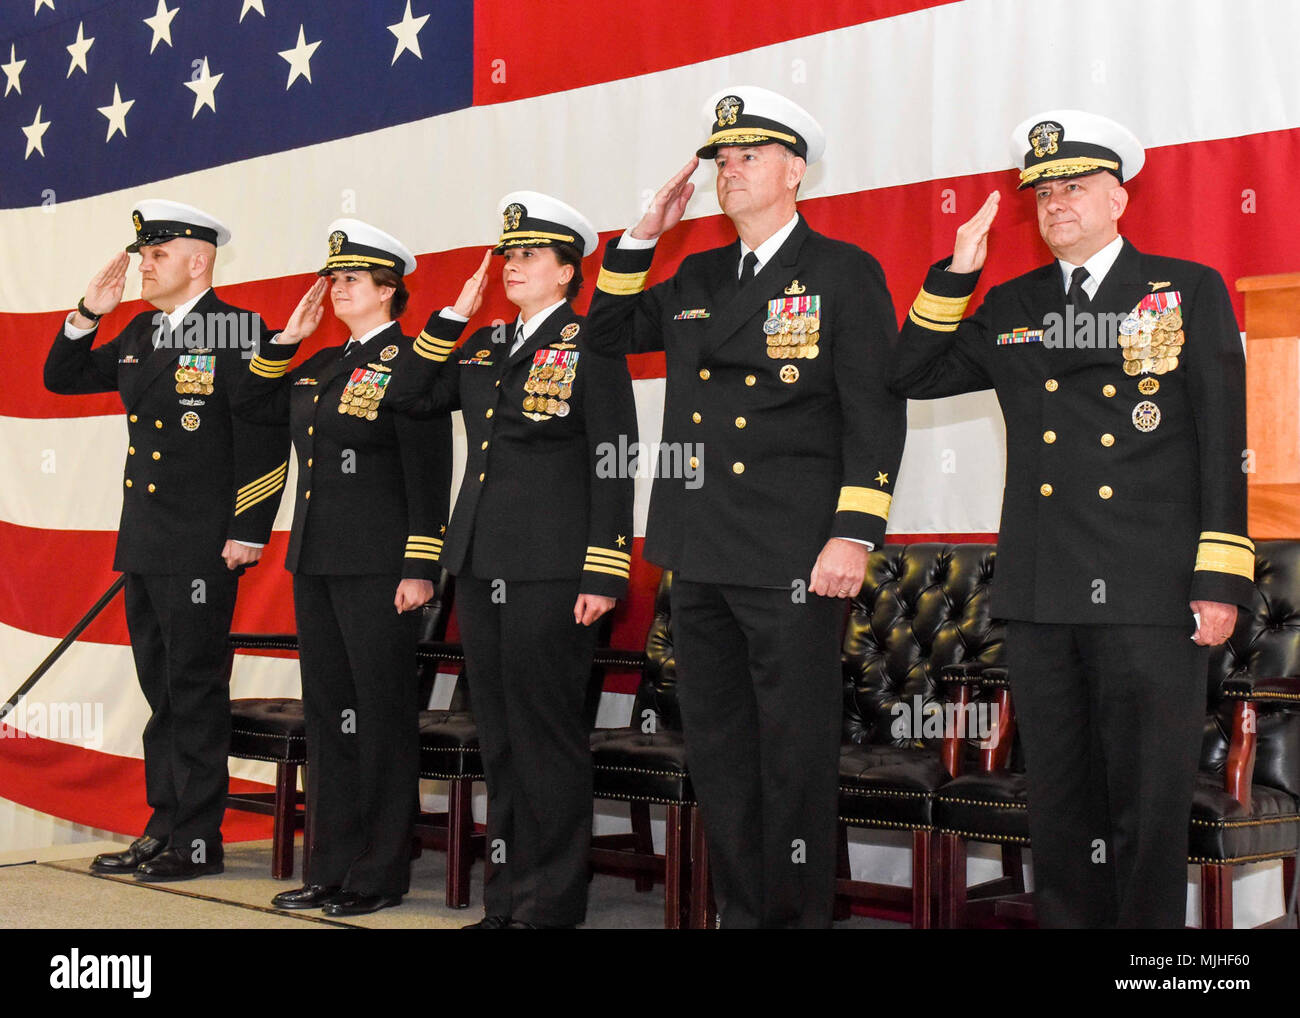 VIRGINIA Beach, Va. (April 5, 2018) – The official party salutes the colors during the Navy Expeditionary Intelligence Command (NEIC) change of command ceremony at Naval Air Station Oceana. NEIC provides Navy and Joint commanders with tactical indications and warning, force protection intelligence, sensitive site exploitation, and intelligence preparation of the operational environment required to win decisively in major combat operations. (U.S. Navy Stock Photo